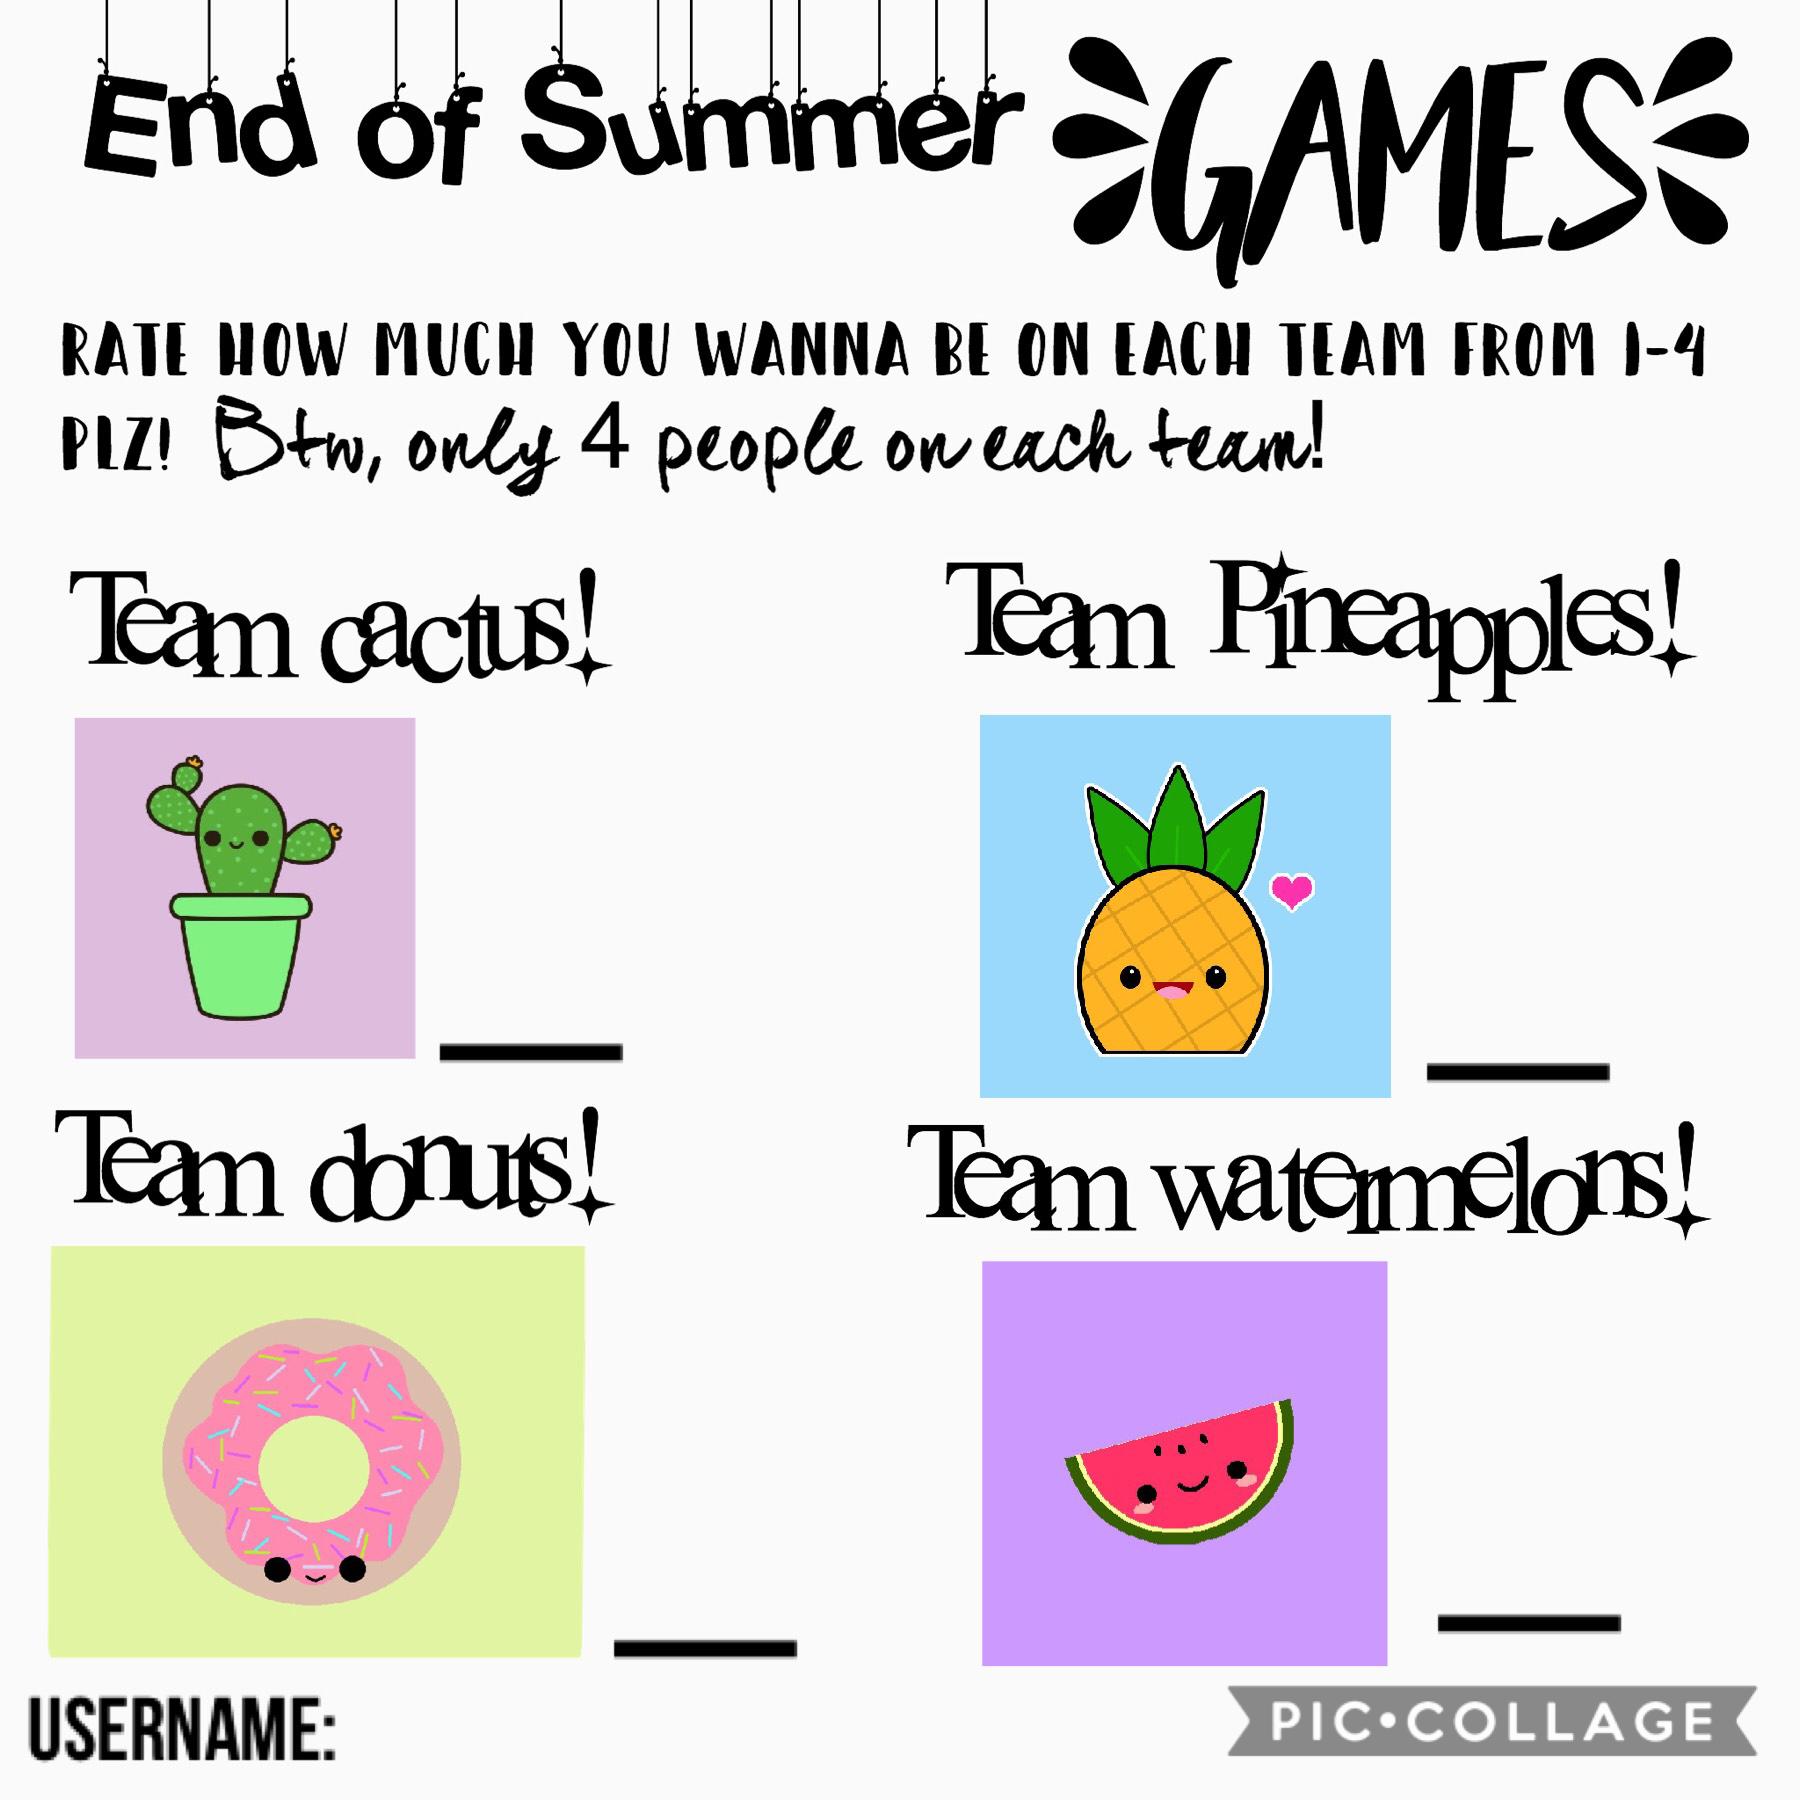 ⛅️Tap⛅️
End of Summer games! Enter quick before the chances are gone!